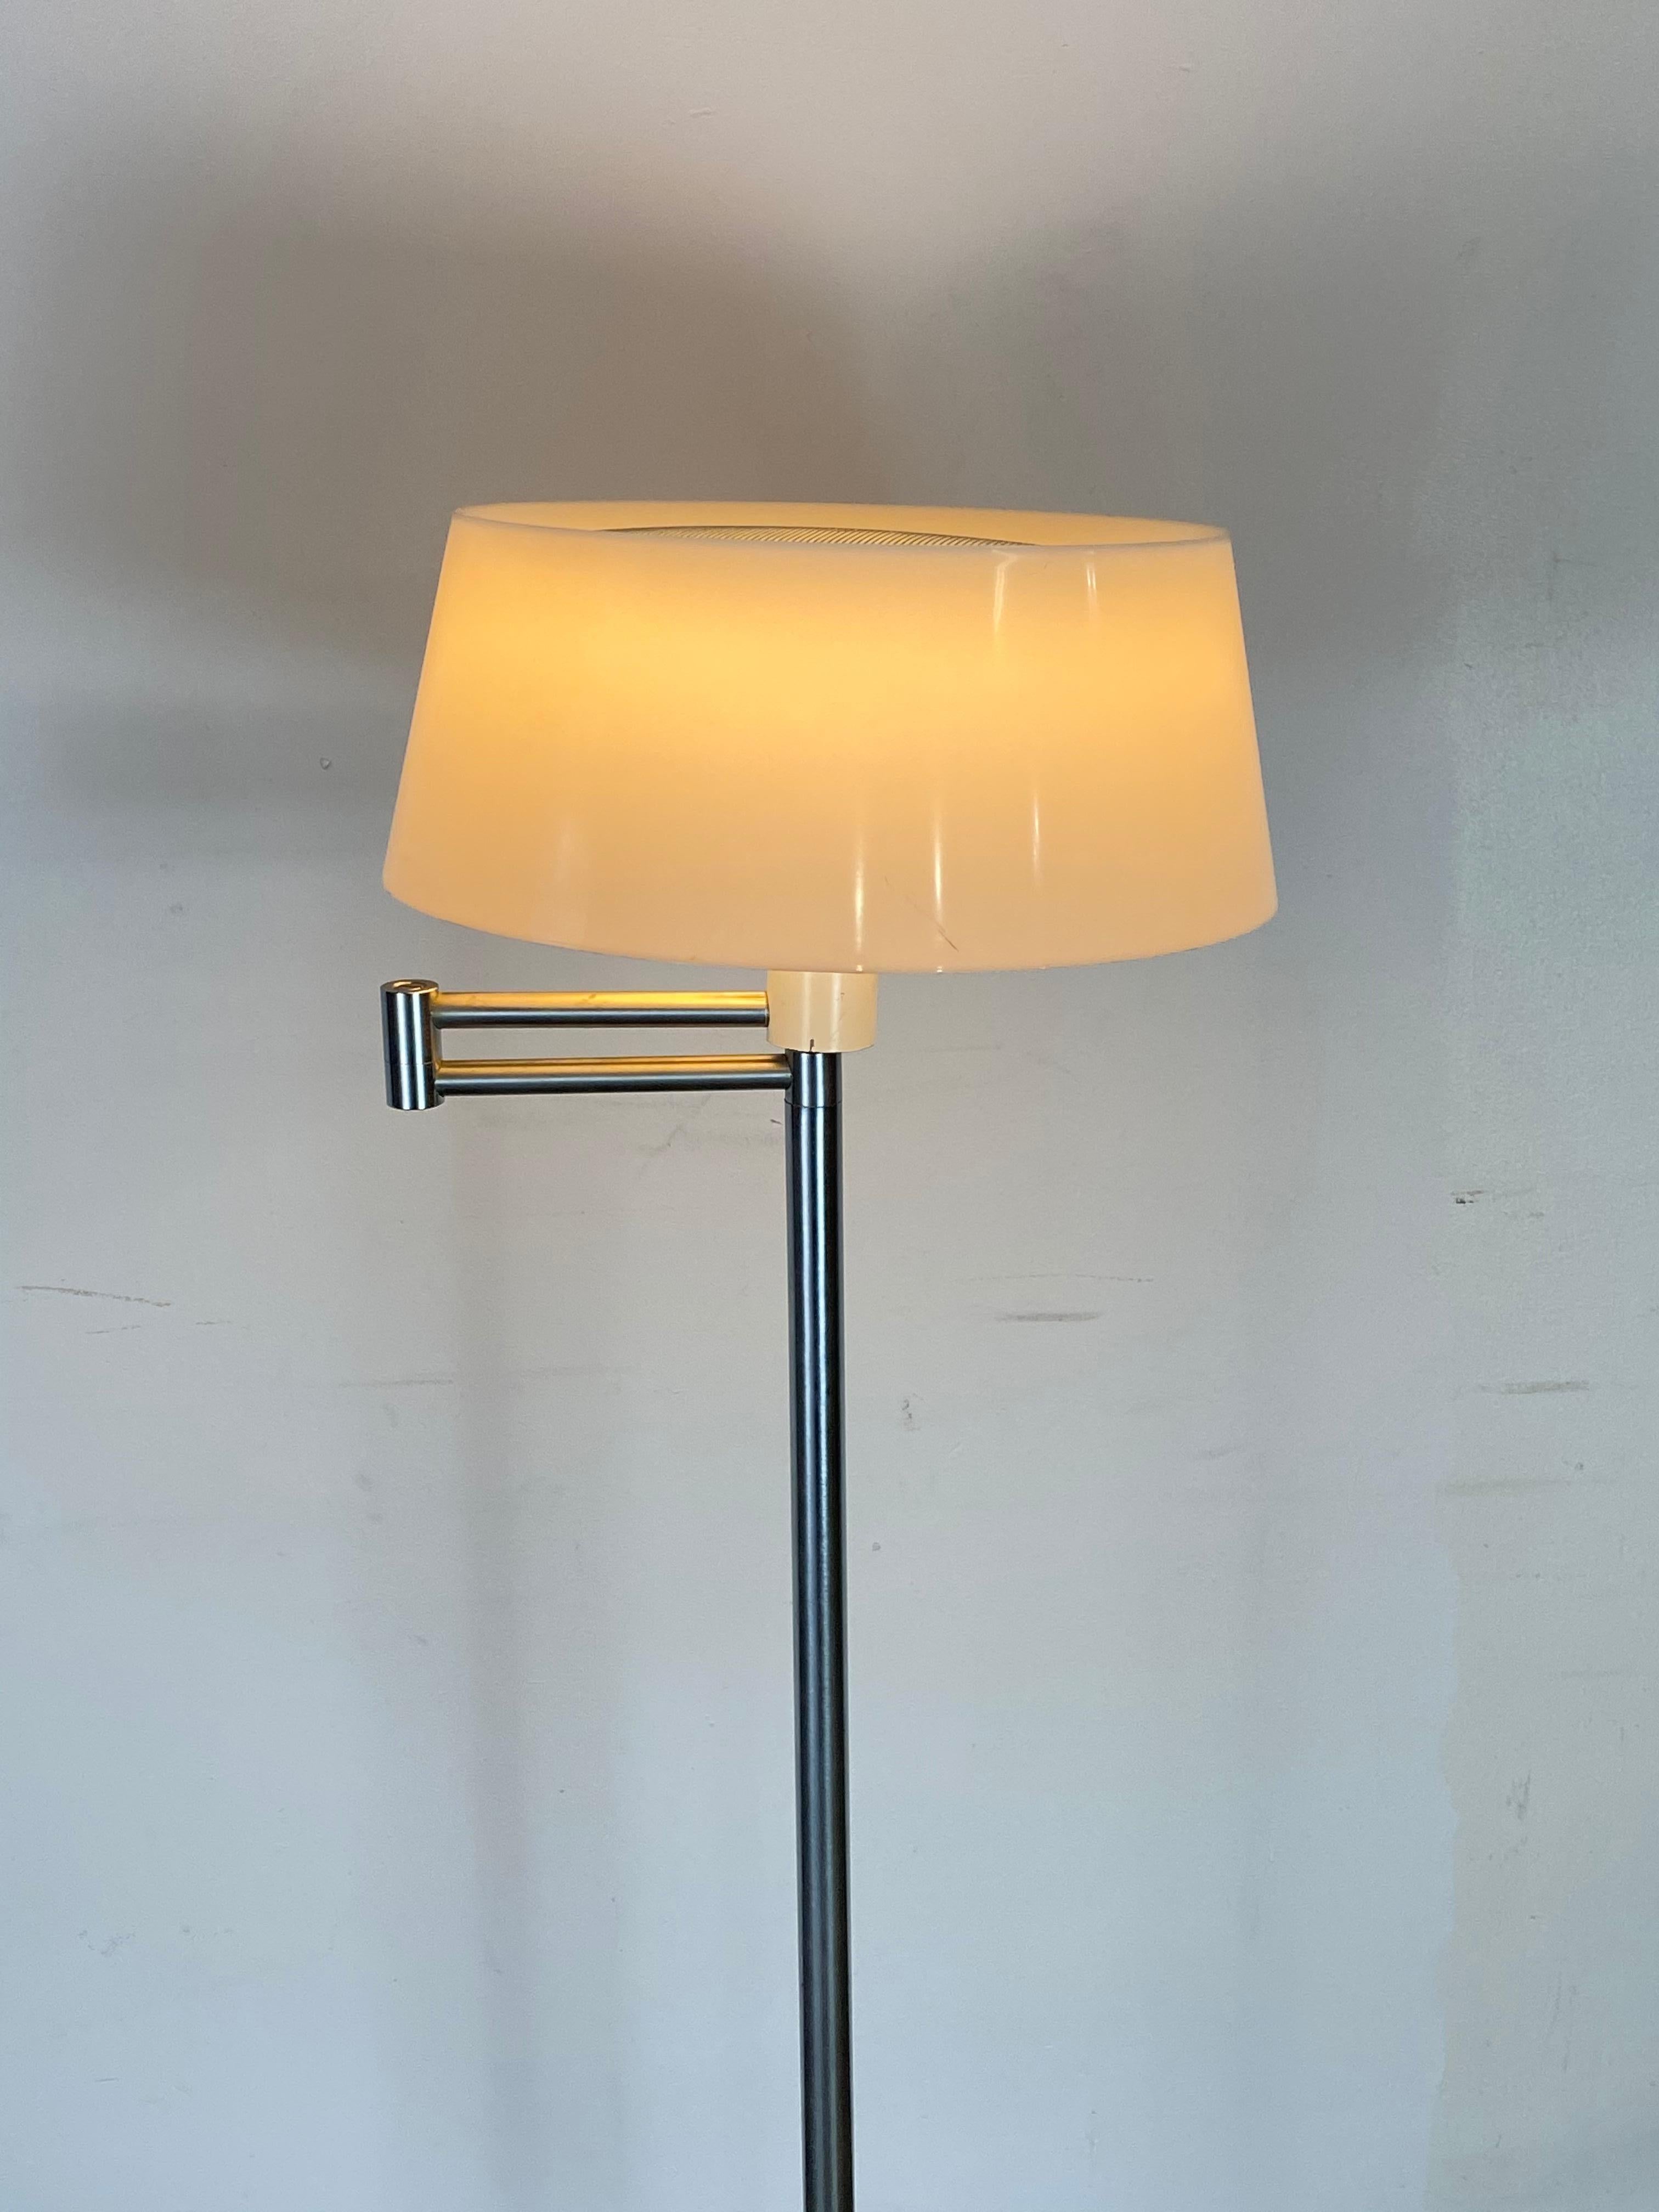 Heavy floor lamp designed by Walter Von Nessen. Original plastic molded shade with perforated screen insert at top. The top screen provides a gorgeous effect when illuminated. Tested and working.